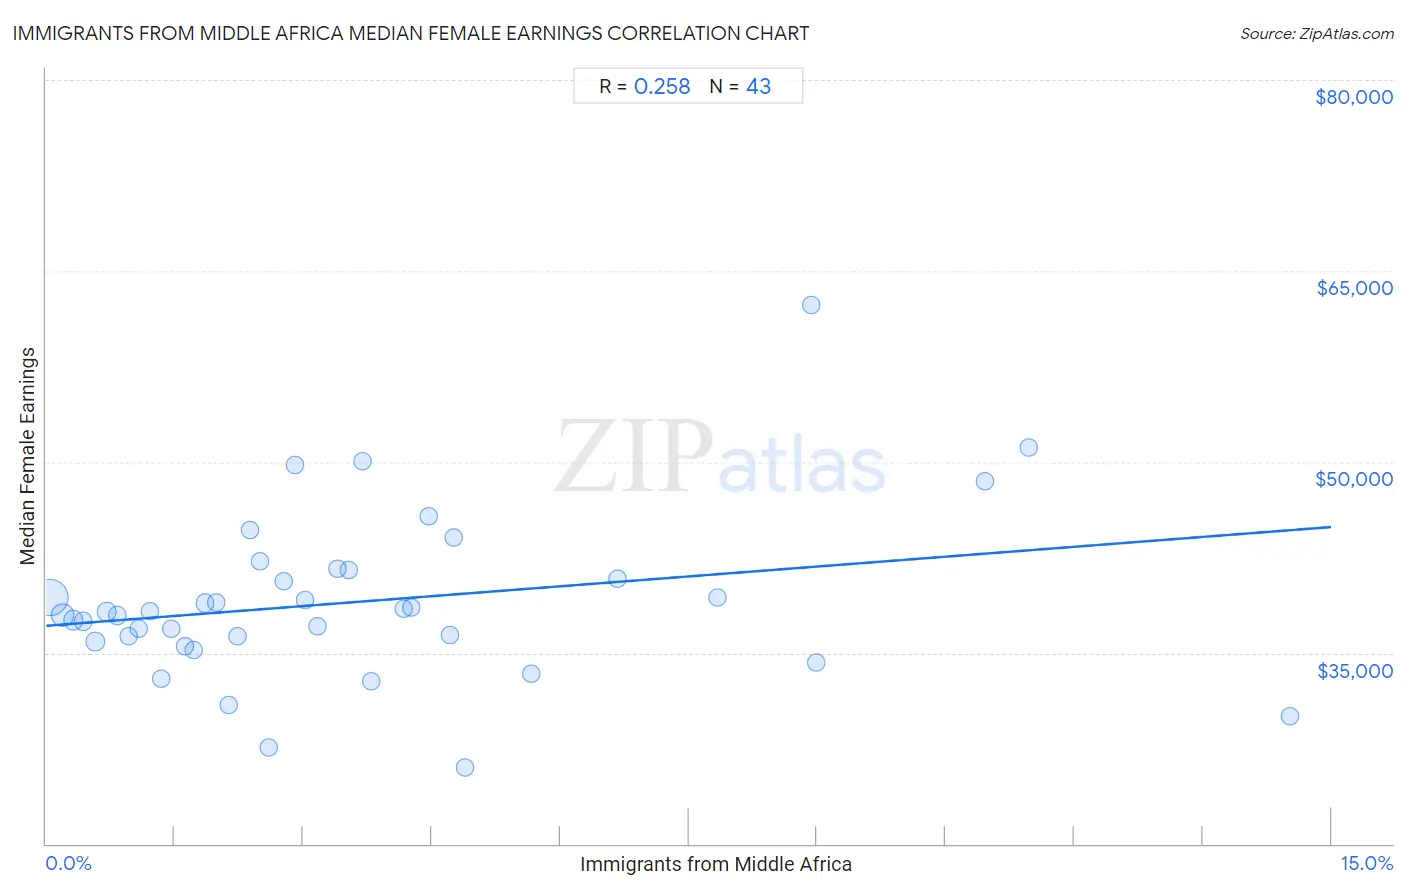 Immigrants from Middle Africa Median Female Earnings